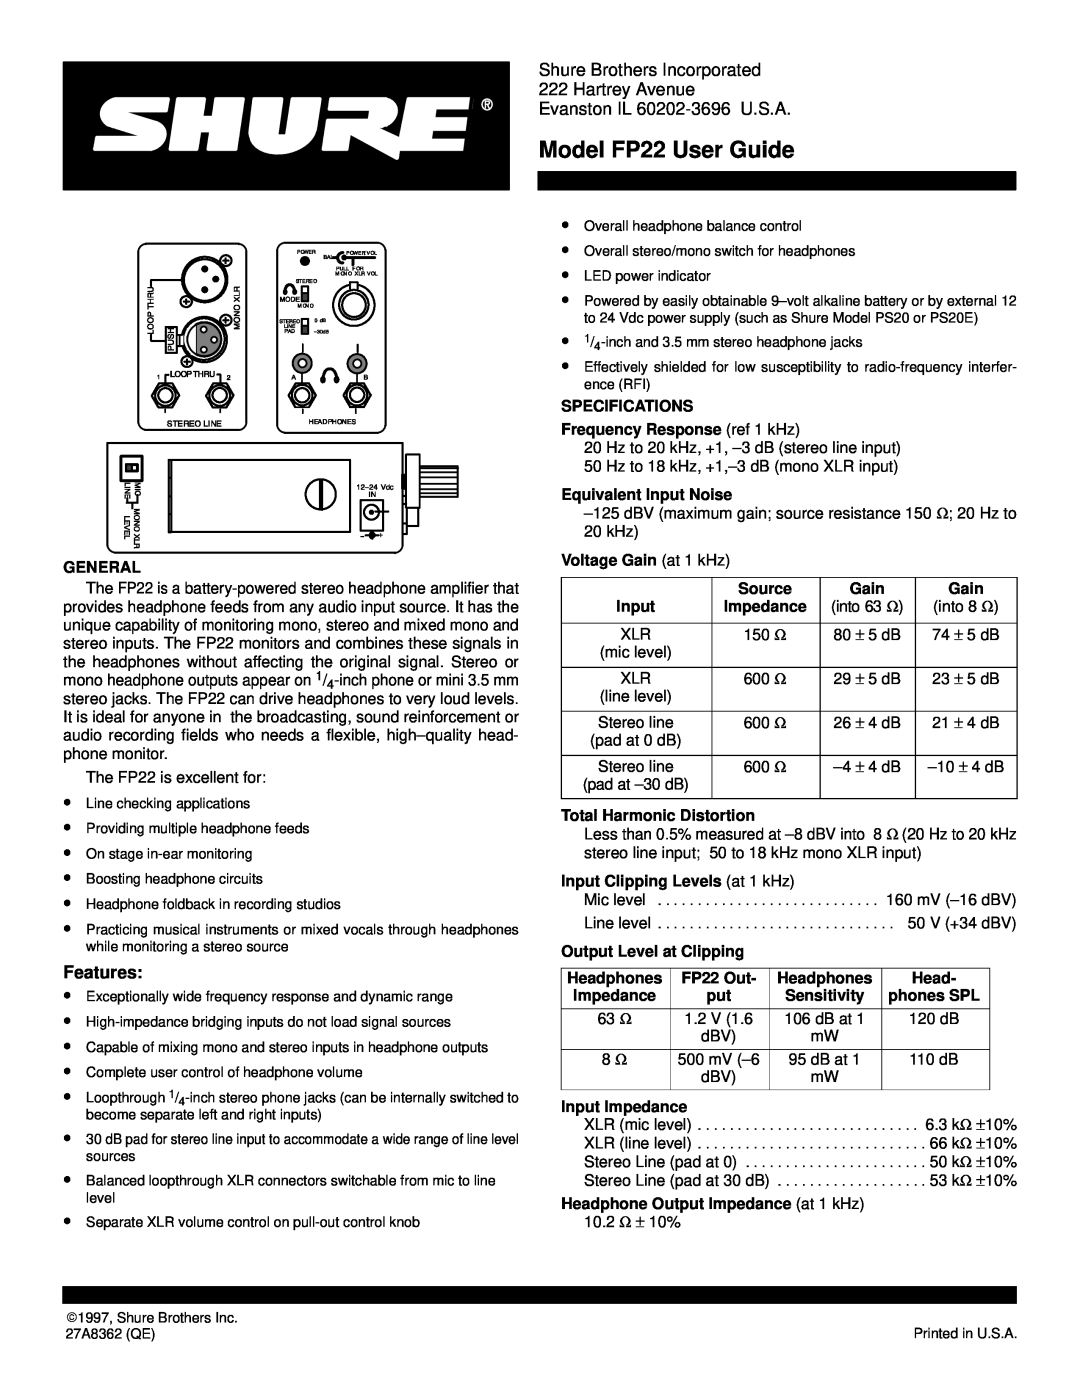 Shure FP22 specifications Features, Shure Brothers Incorporated 222 Hartrey Avenue, Evanston IL 60202-3696U.S.A 